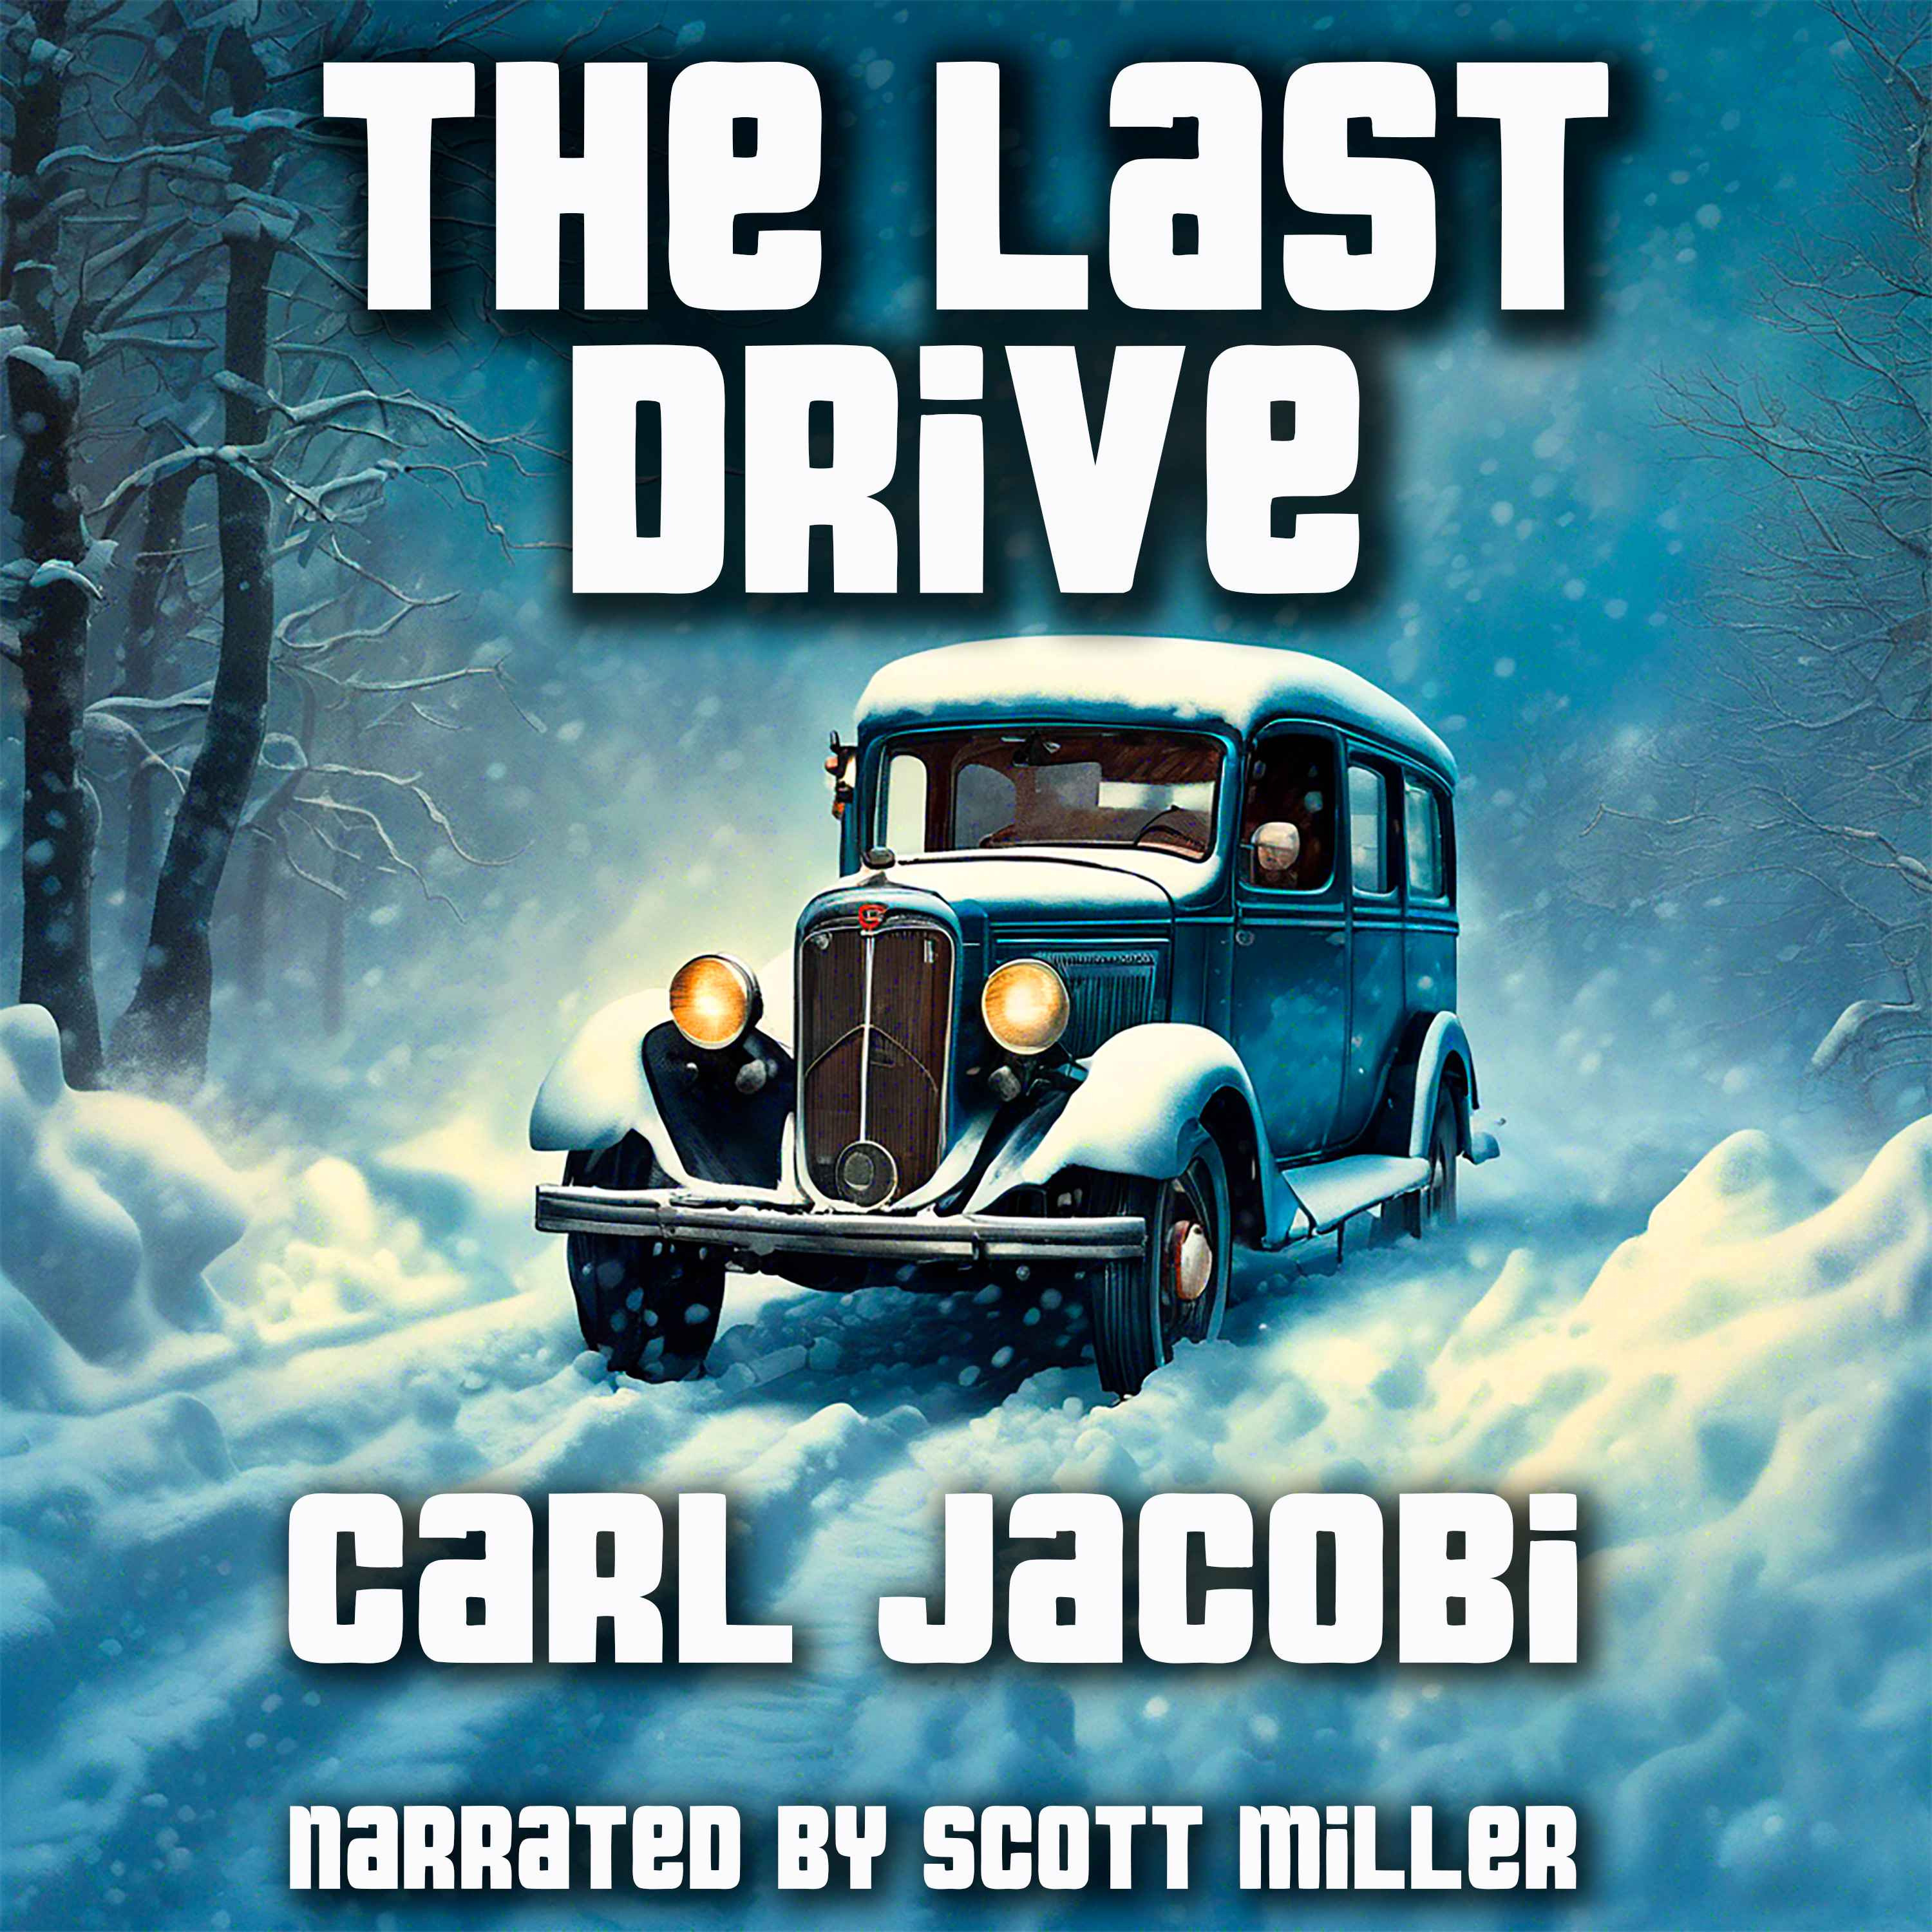 The Last Drive by Carl Jacobi - Ghost Stories